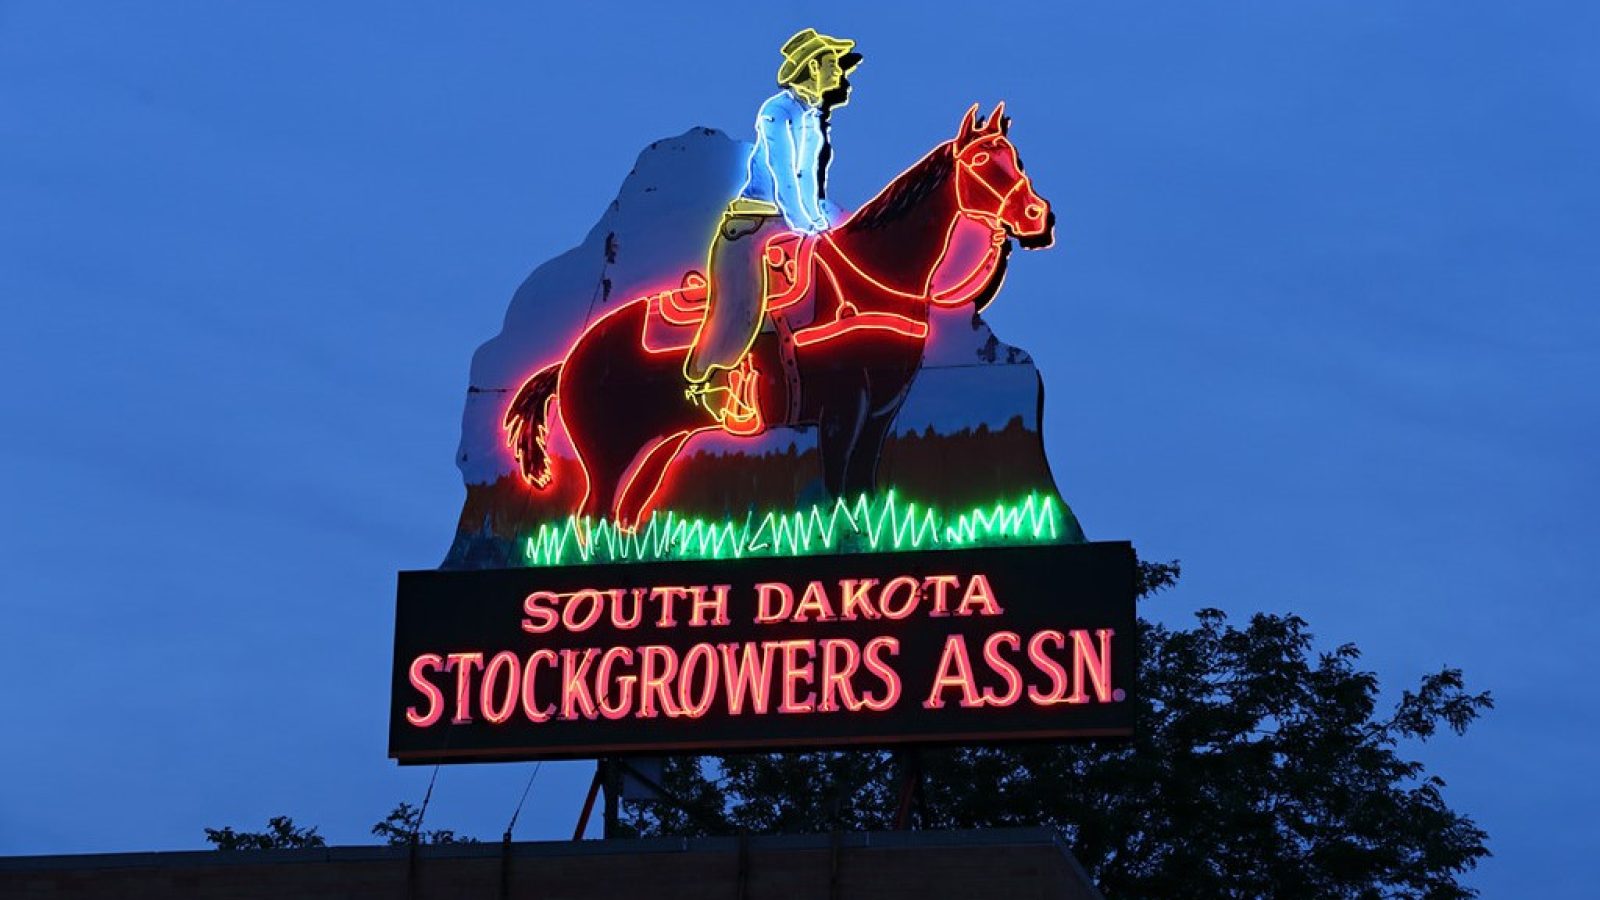 Neon sign of cowboy on horse